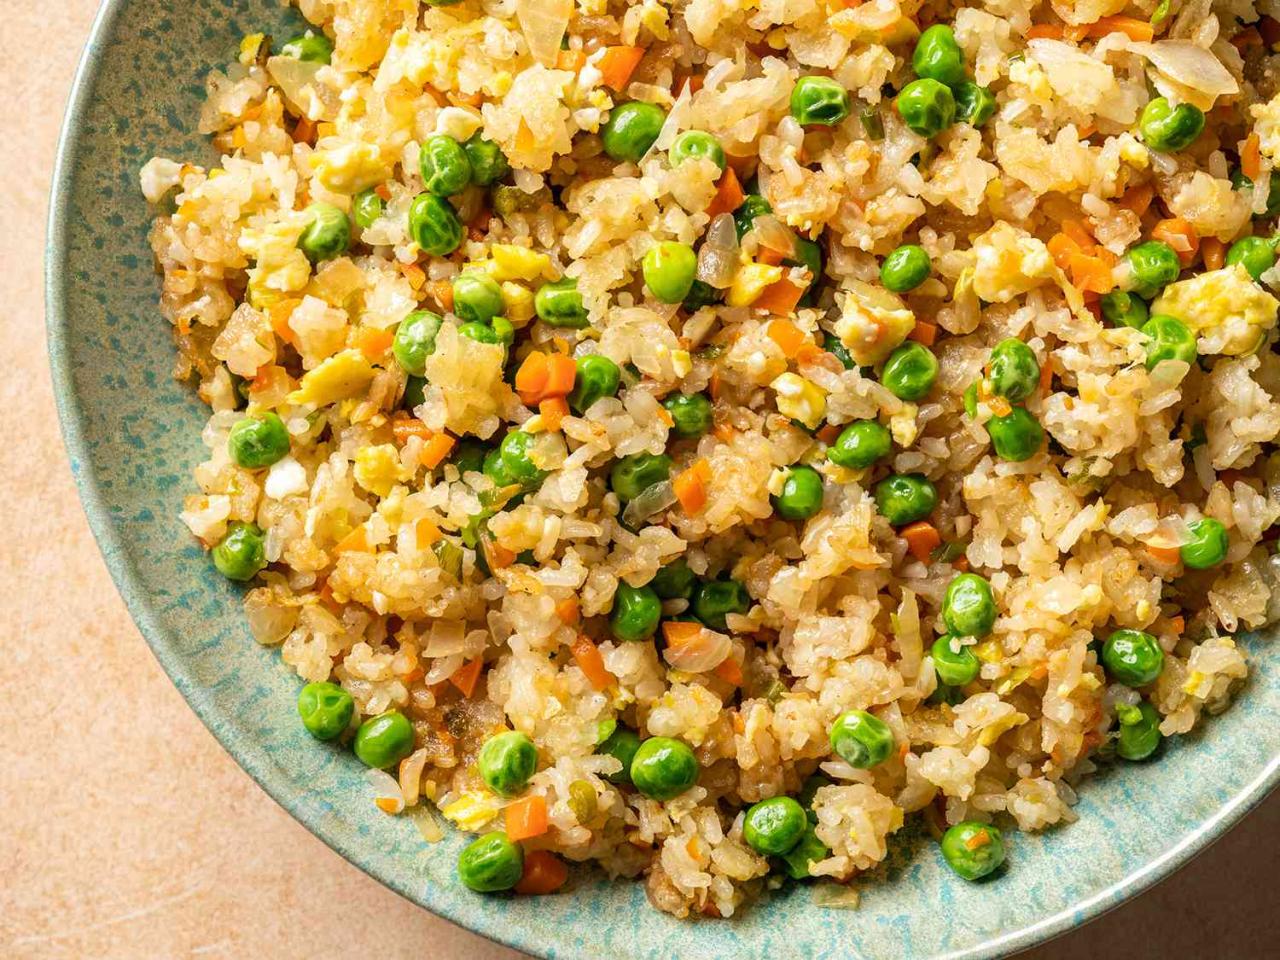 Vegitup Rice – A Delicious and Healthy Plant-Based Meal